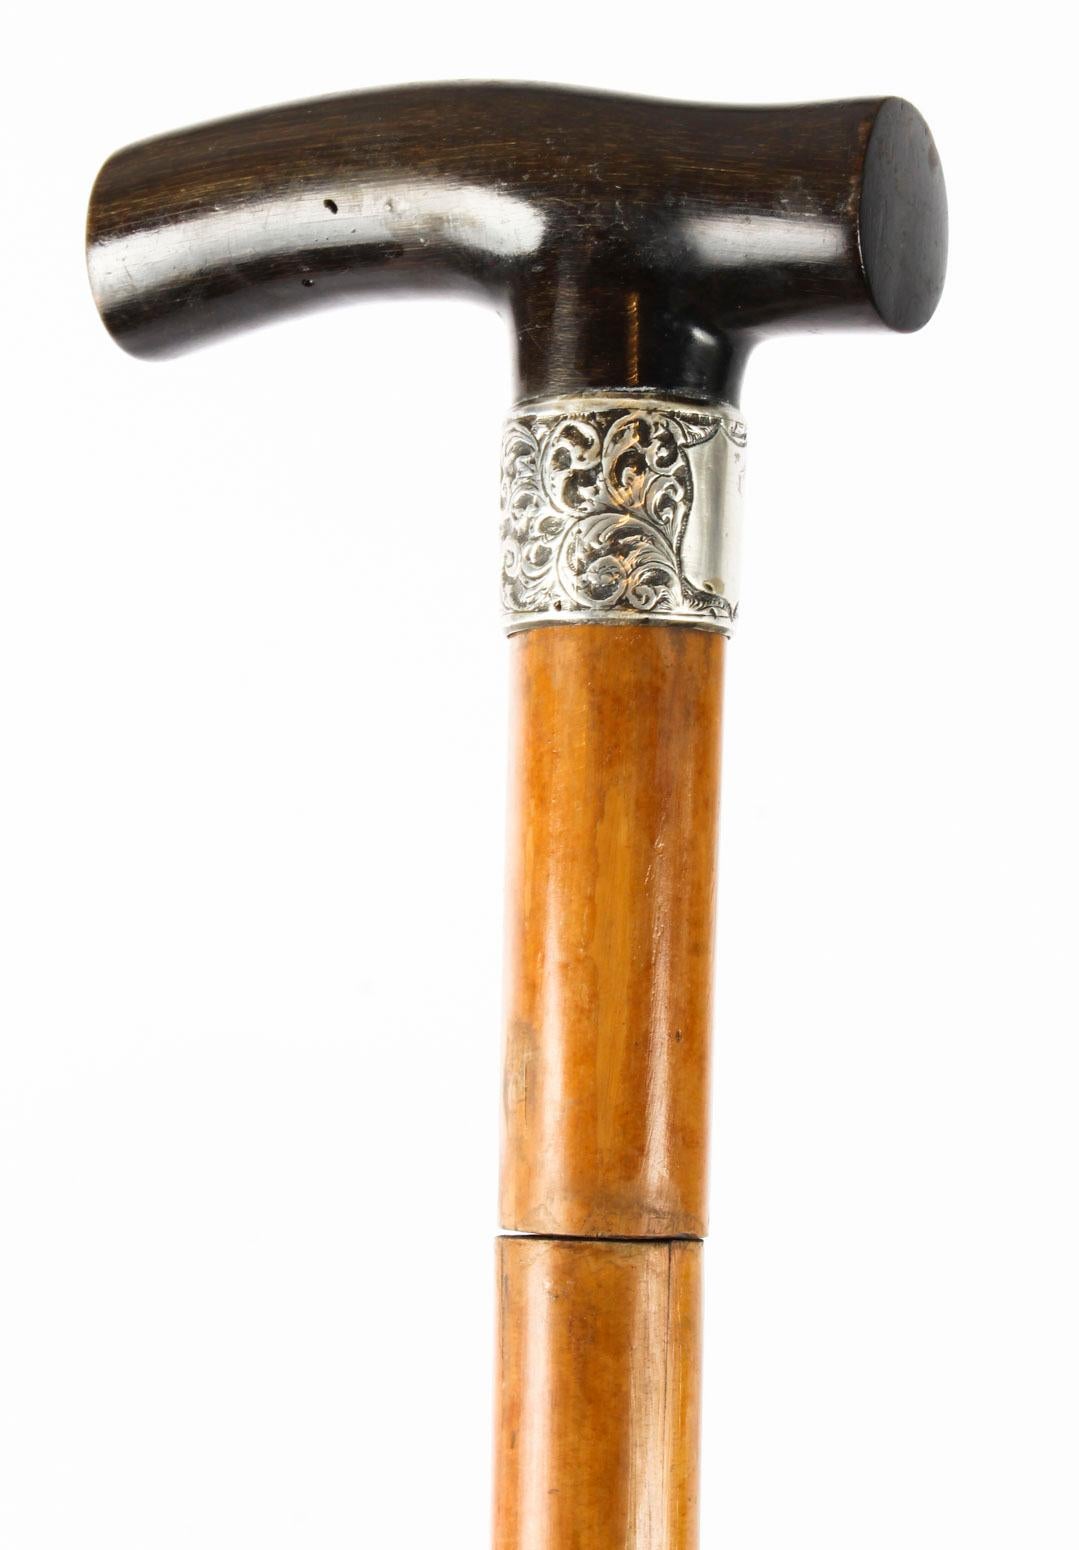 This is a beautiful antique English silver mounted Malacca and horn sword walking stick, bearing hallmarks for Birmingham 1906.

It has an exquisite L-shaped horn handle and features a decorative sterling silver collar with shield.

The Malacca